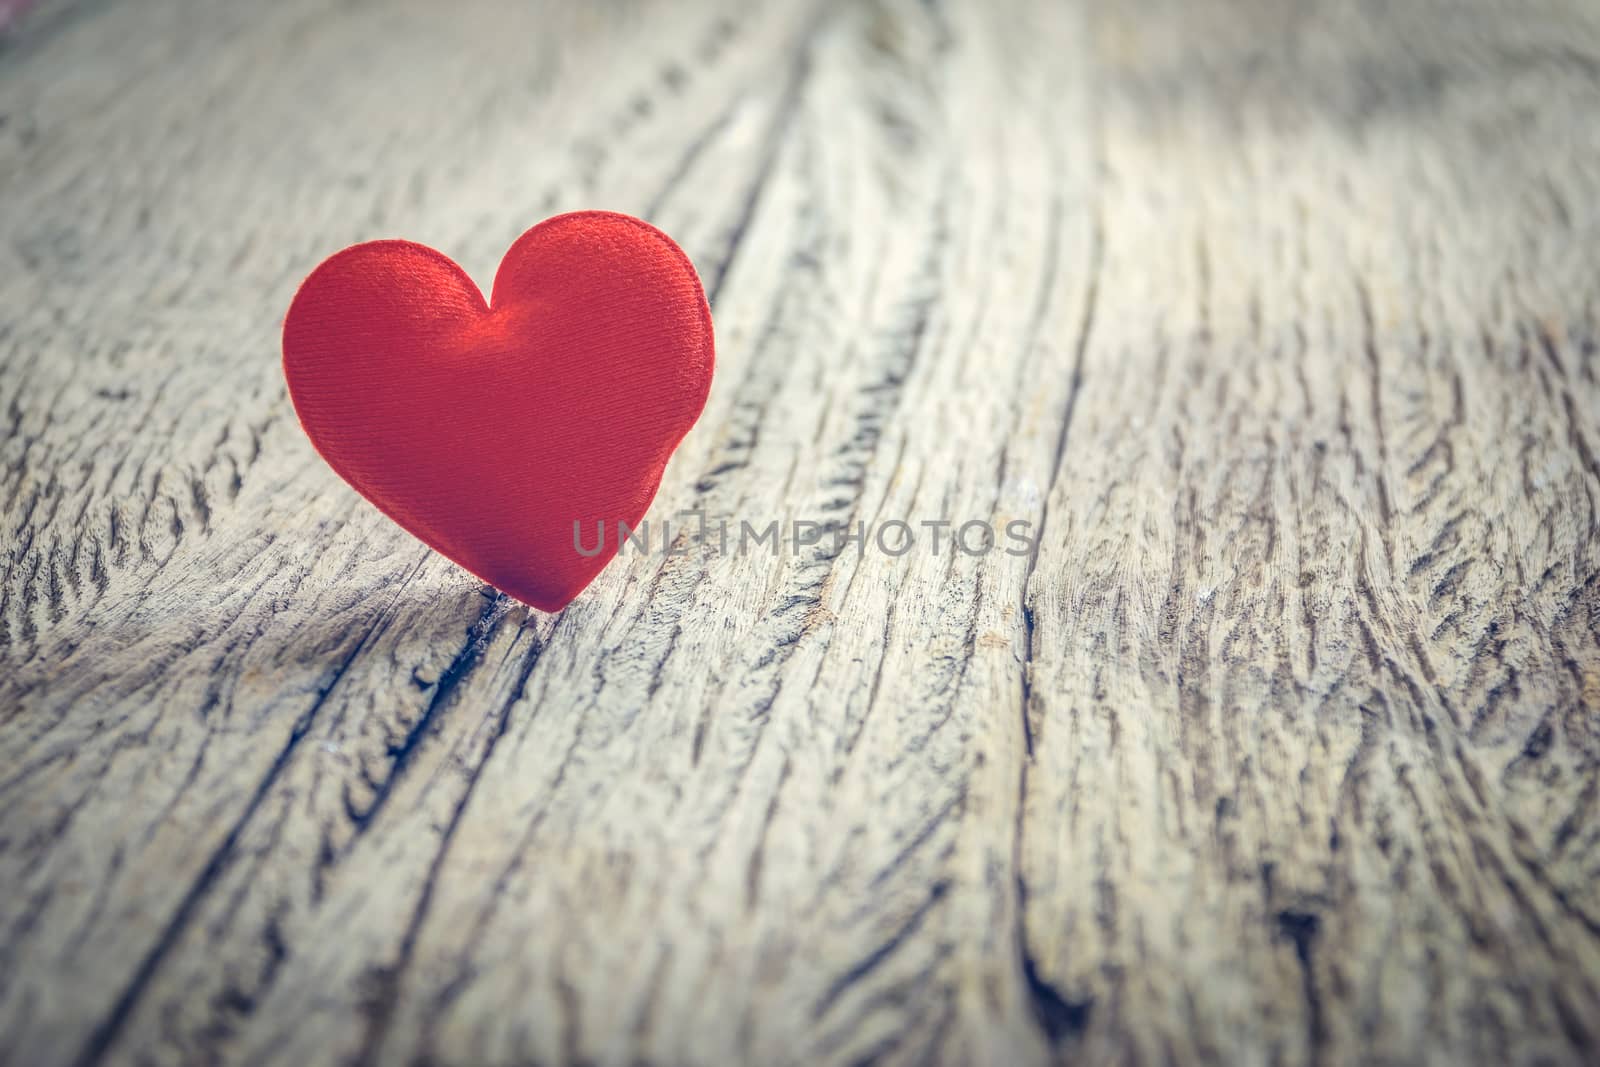 Red heart on wooden floor with copy space for text, used in love concept on Valentine's Day.